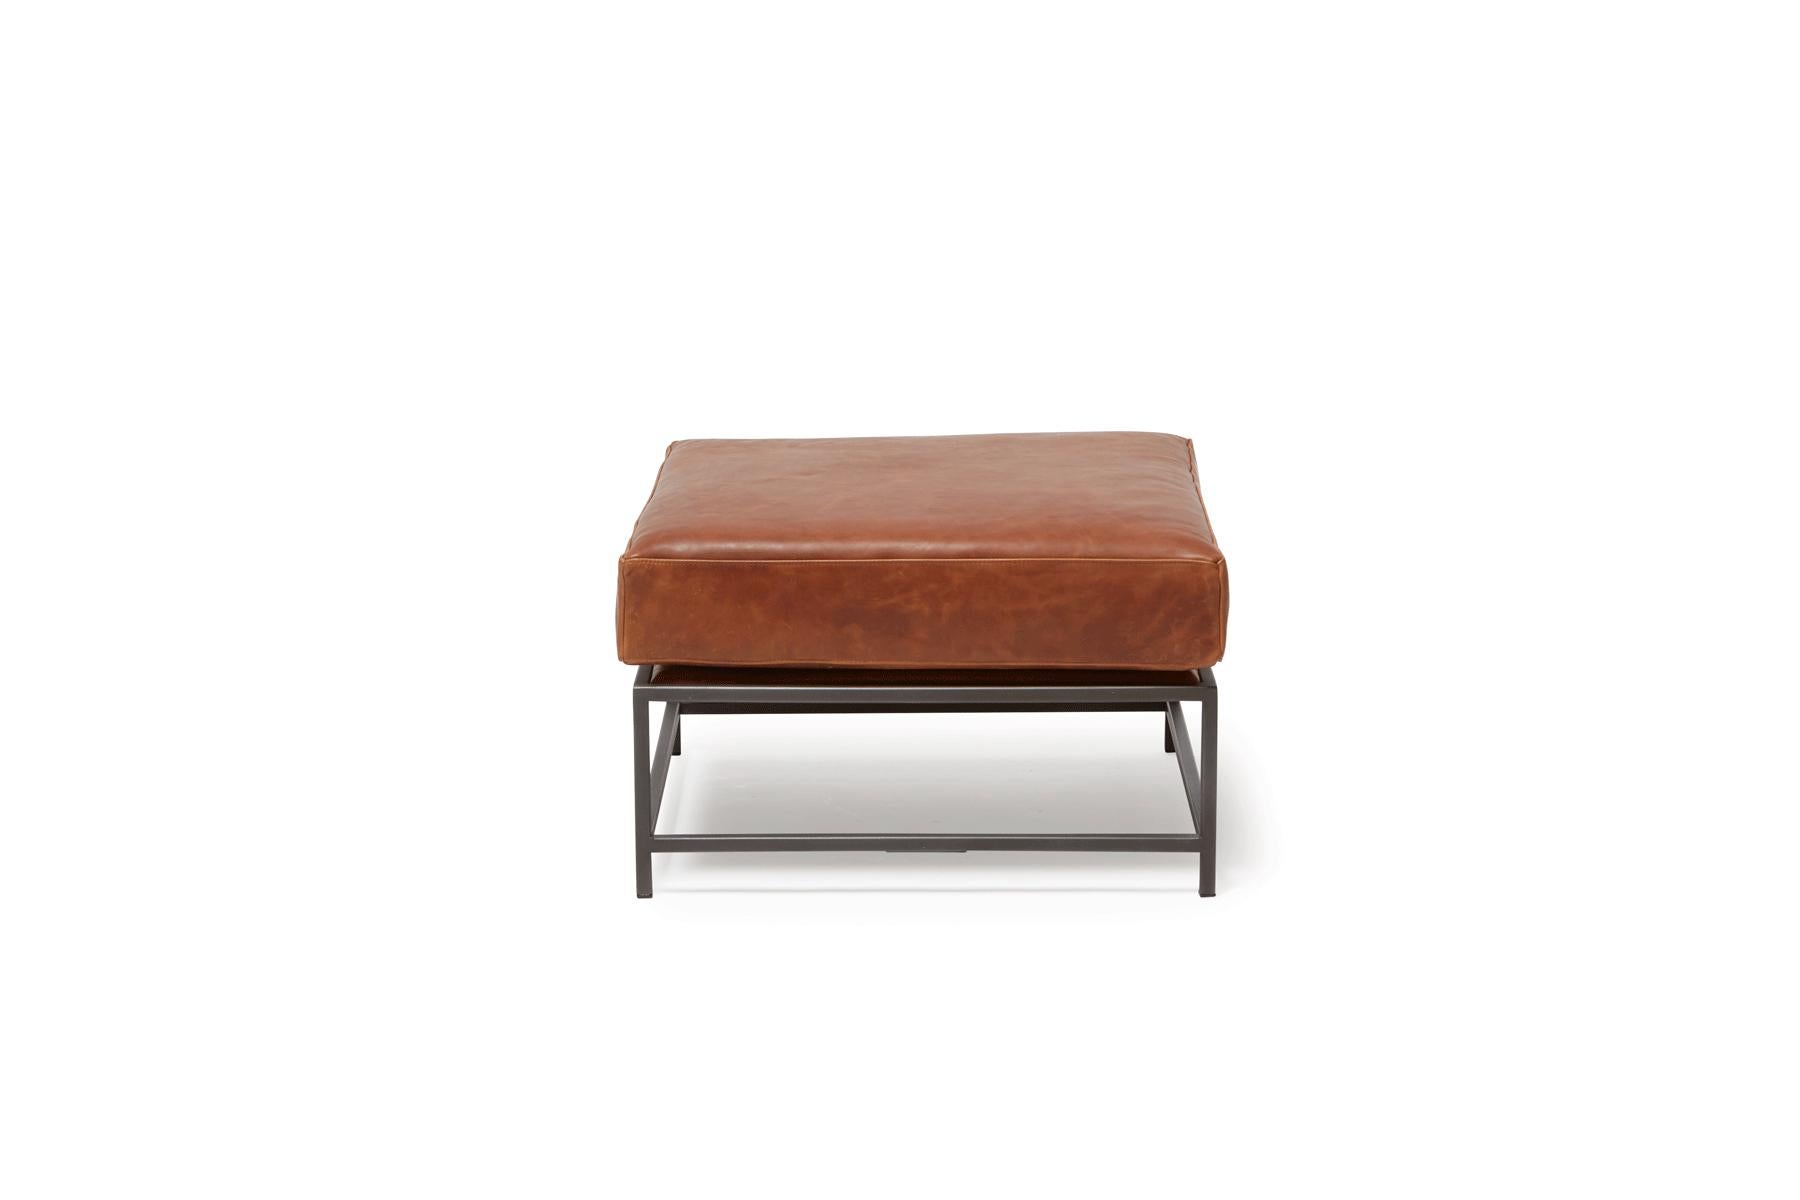 Designed to pair with any of the Inheritance Seating options, the Ottoman is a great addition to add a lounge element to your seating arrangement. 

This variation is upholstered in a rich, warm  auburn brown leather. The foam seat cushions have